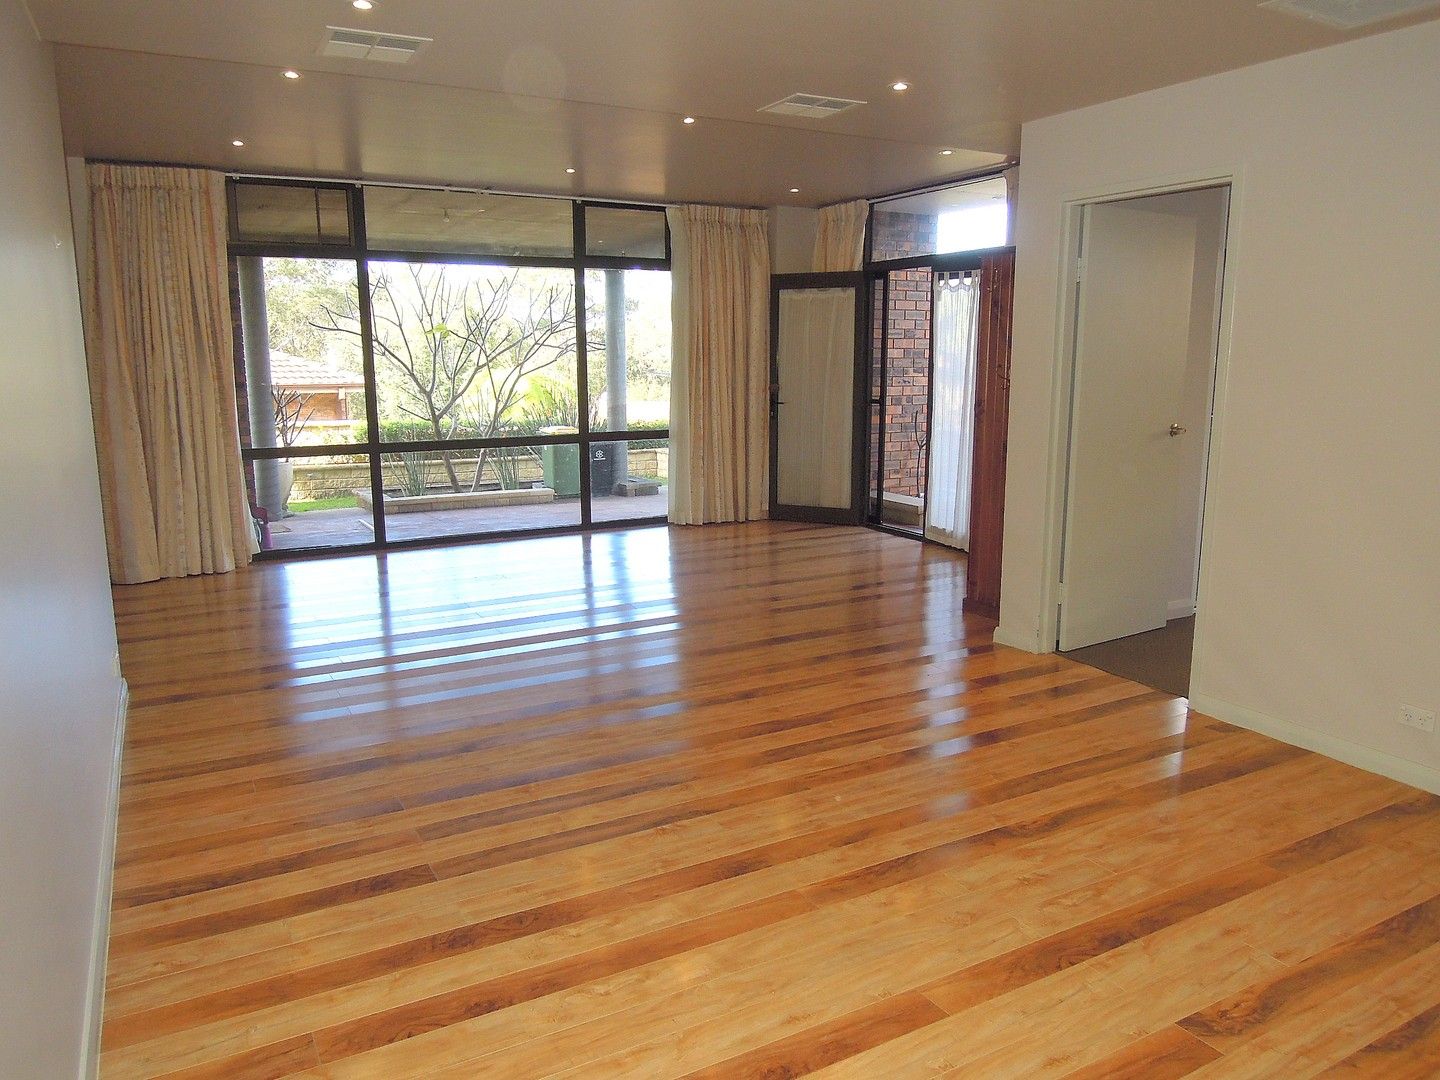 2 bedrooms Apartment / Unit / Flat in 1/31 Bernard Road PADSTOW HEIGHTS NSW, 2211